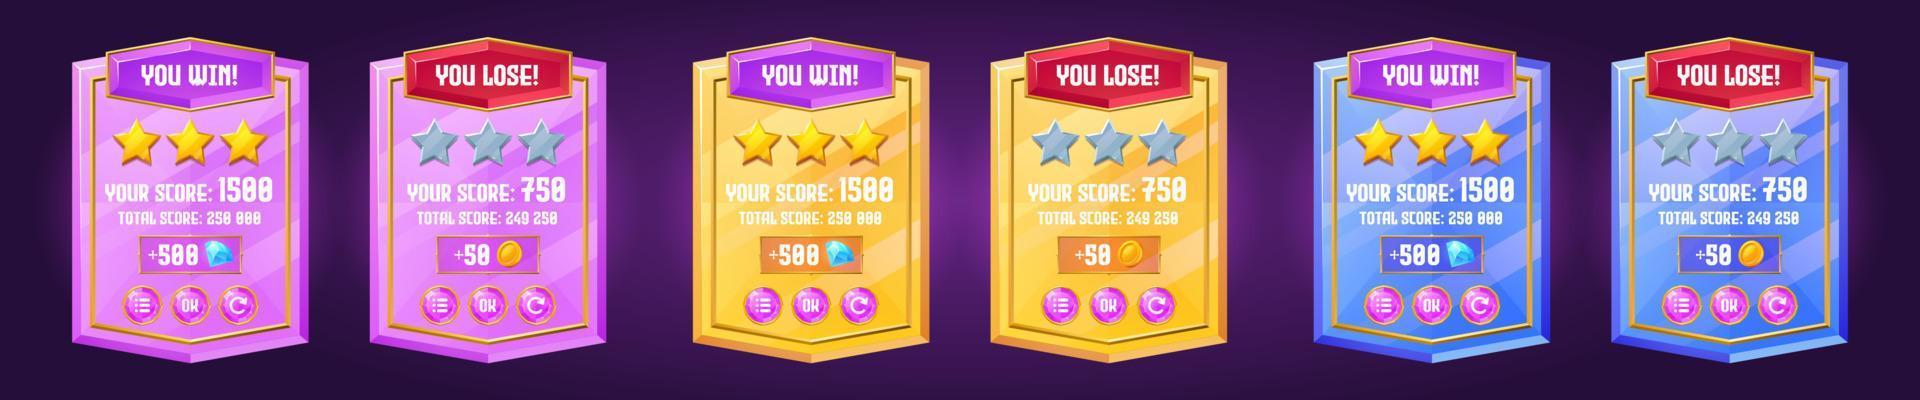 Game color boards of win or lose, badges vector